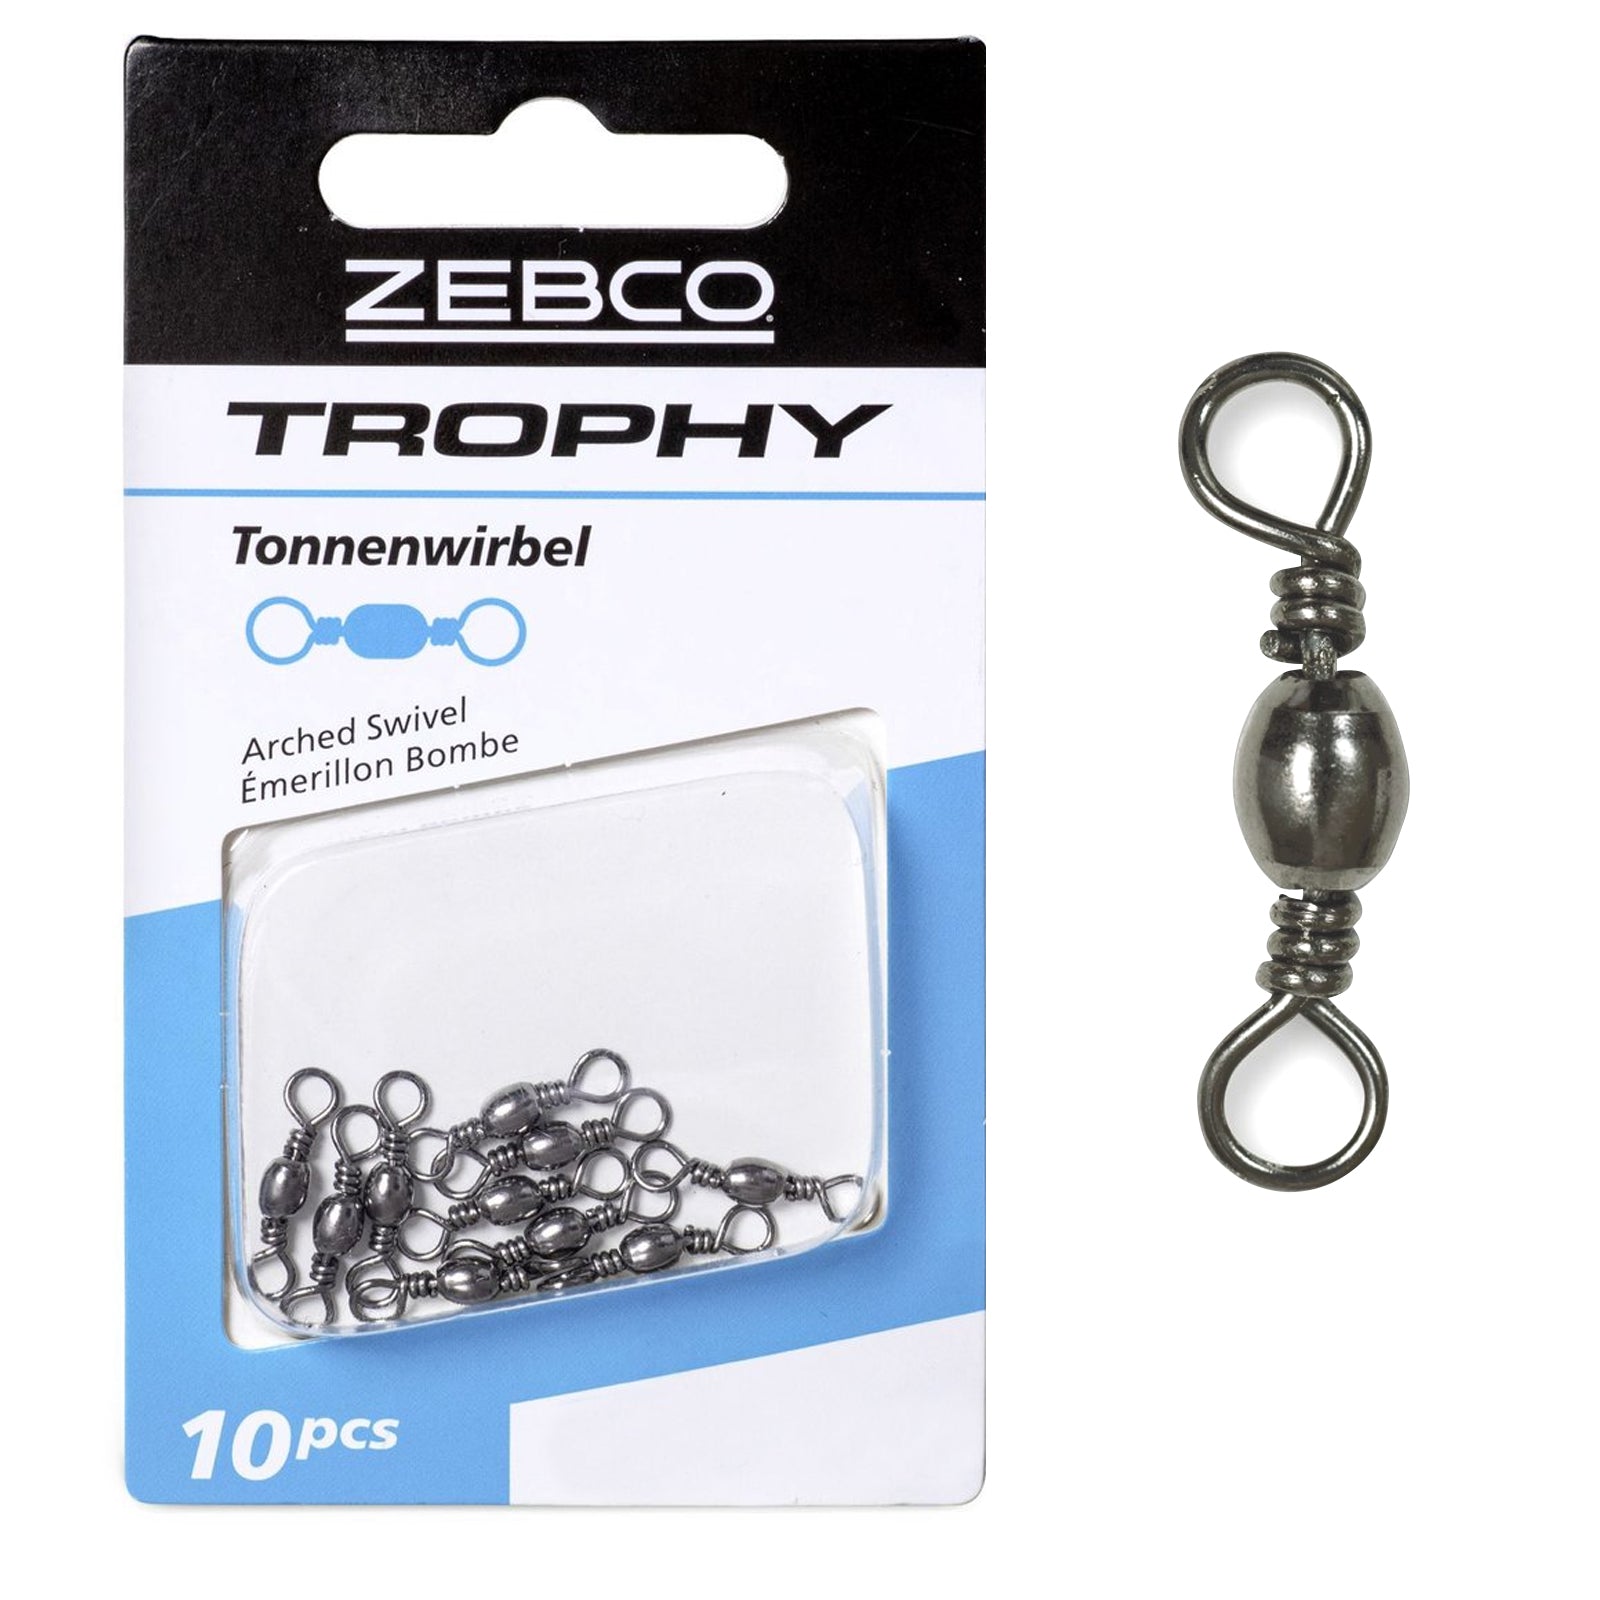 Zebco Trophy Arched Swivel for Fishing Pack of 10